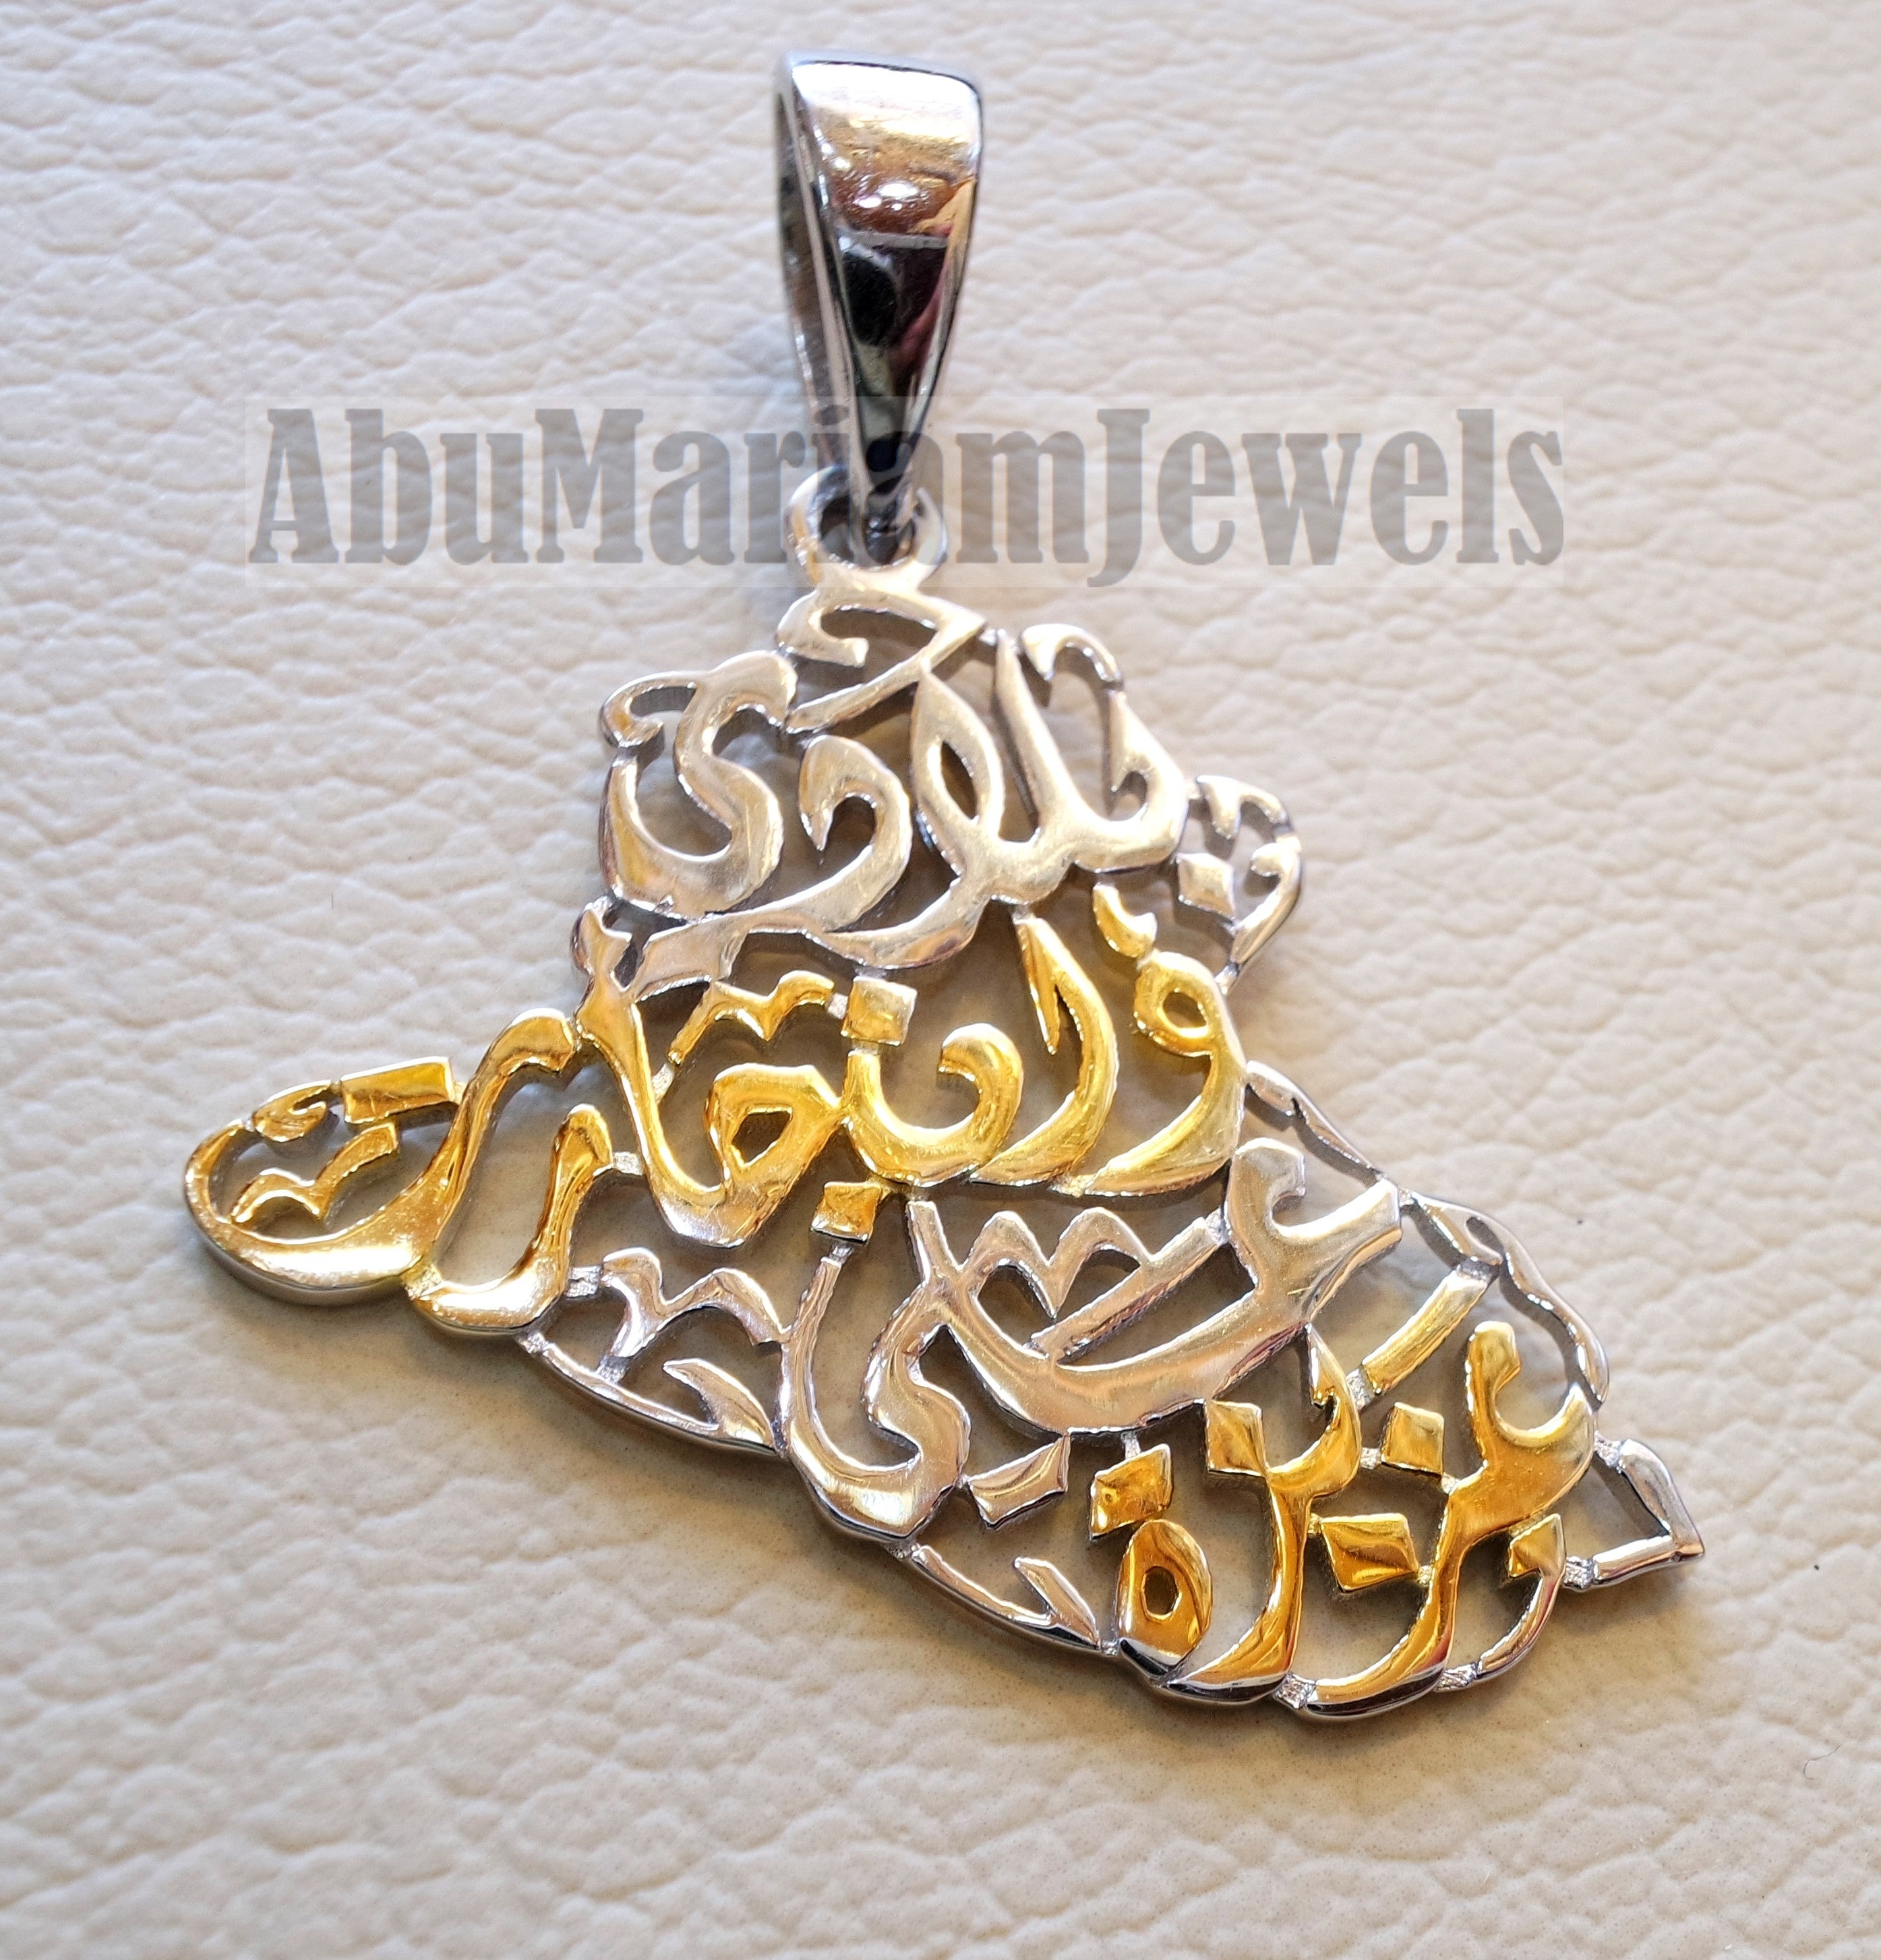 Iraq map pendant 2 tone with famous poem verse sterling silver 925 with gold plating jewelry arabic خارطة العراق